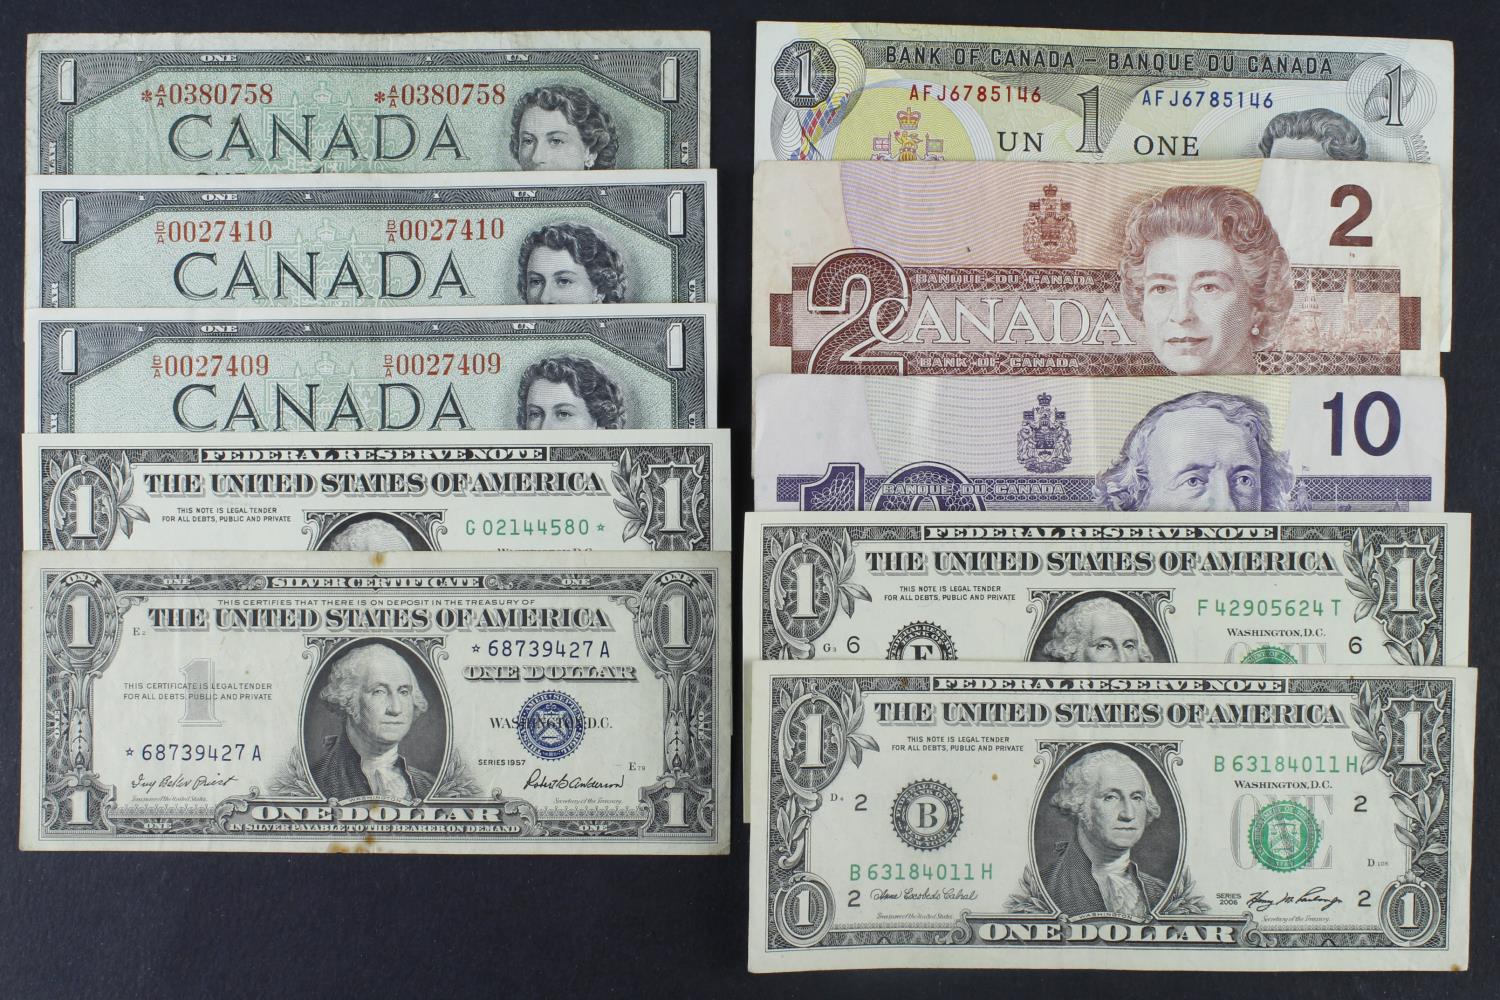 Canada and USA (10), Canada 1 Dollar dated 1954 (2) signed Coyne and Towers, a consecutively